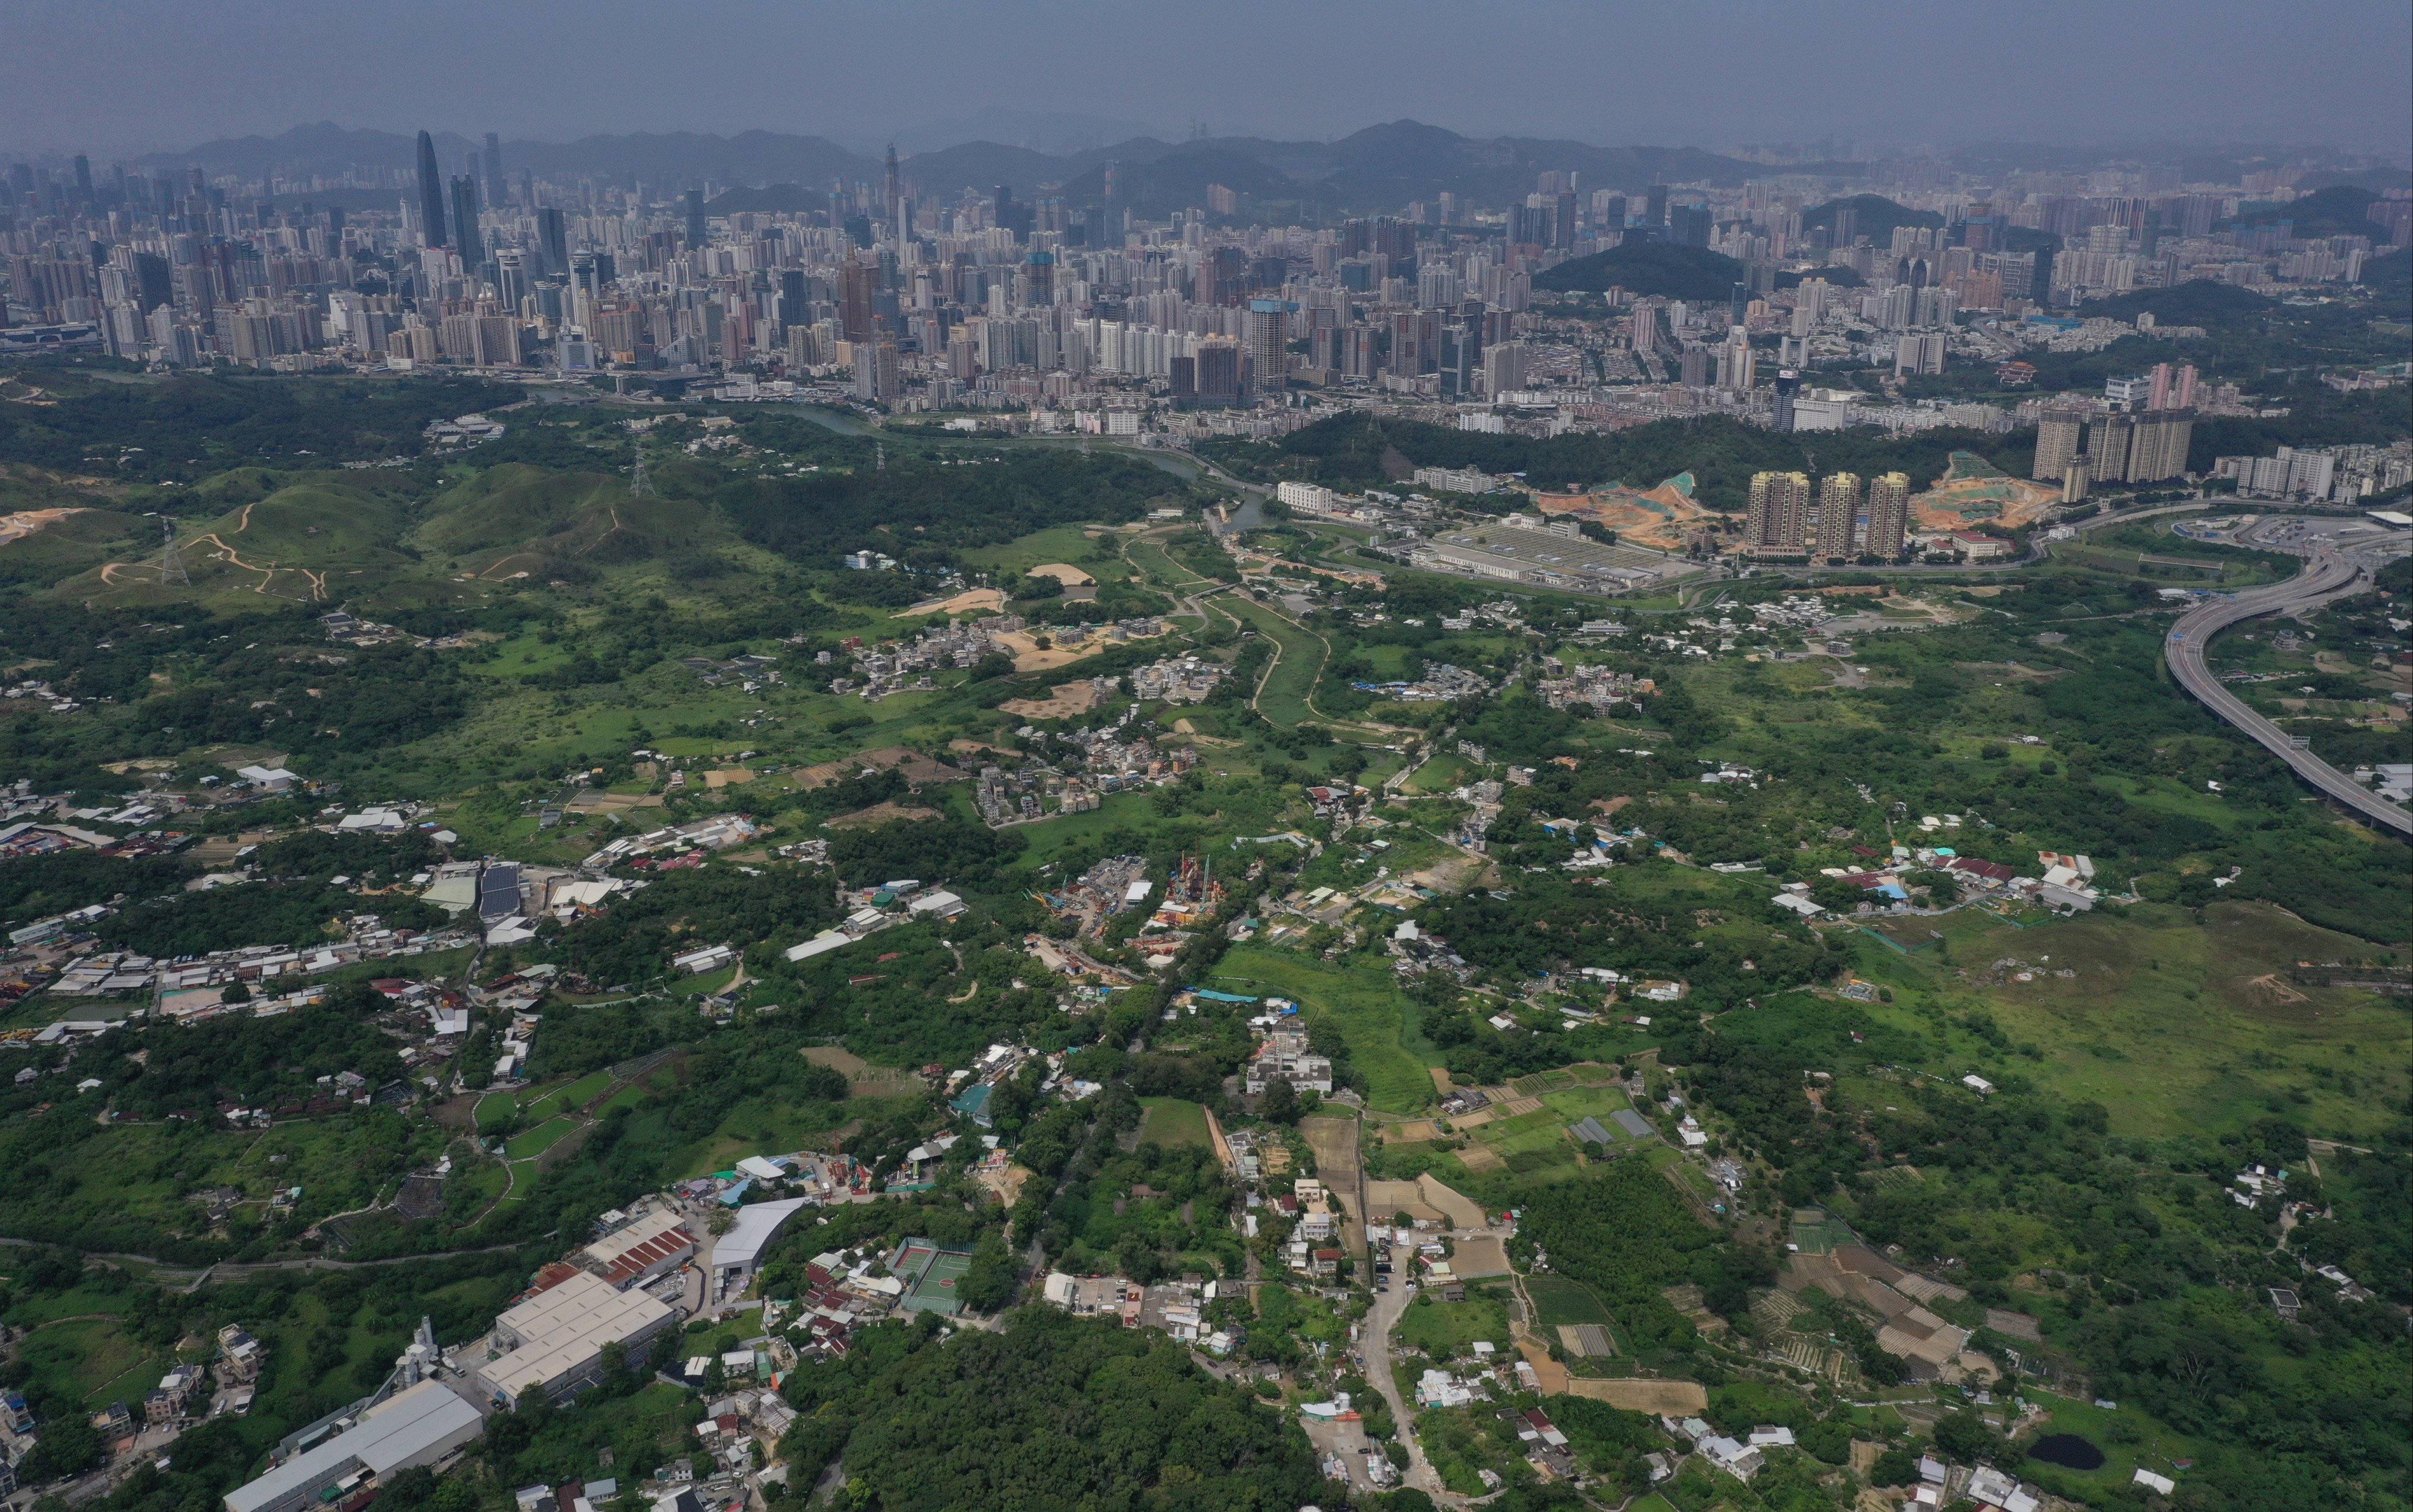 Part of the area to be redeveloped into the new Northern Metropolis, with Shenzhen just across the border with mainland China. Photo: Winson Wong